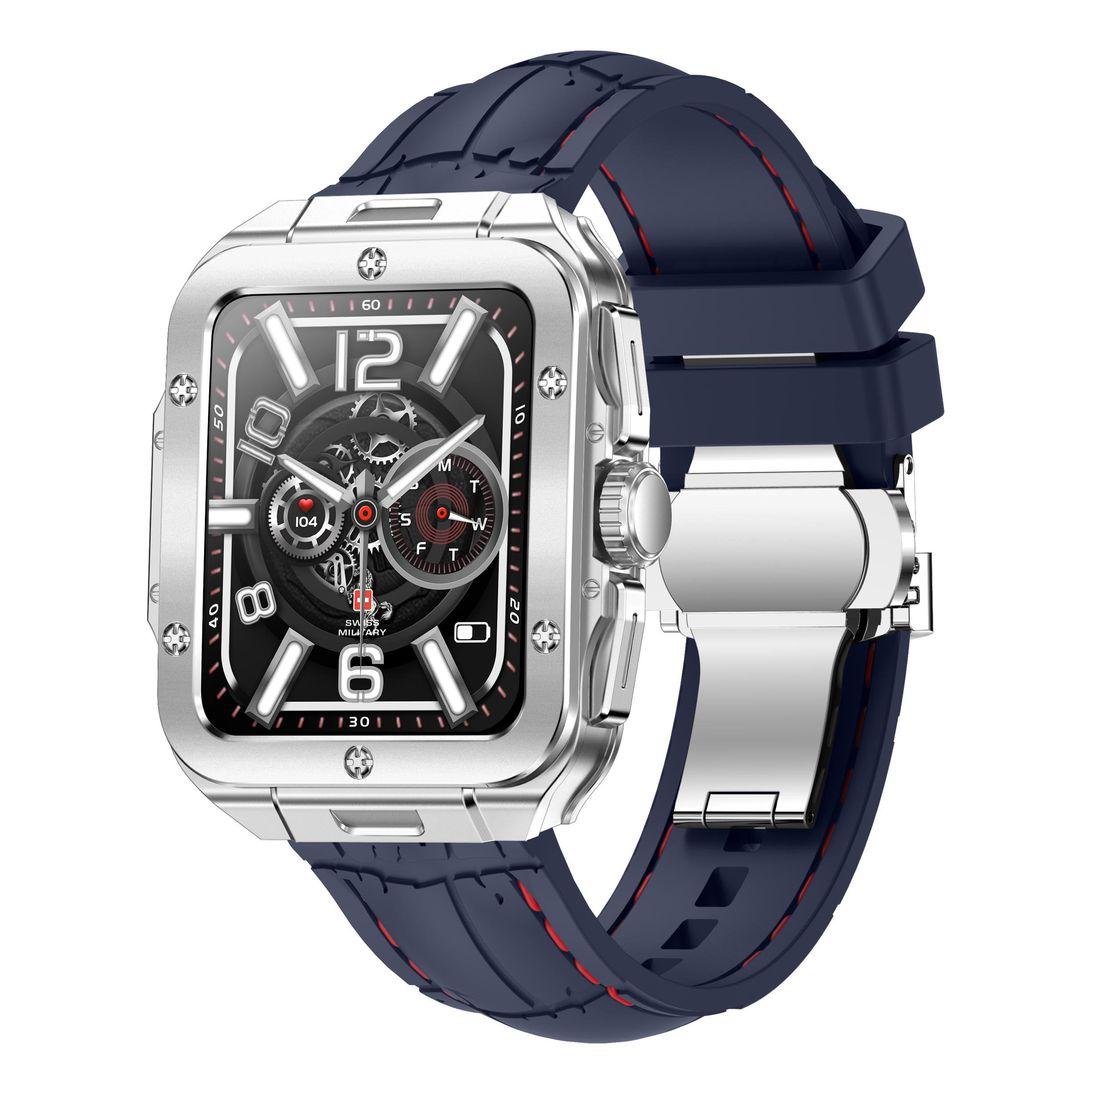 Swiss Military Alps 2 Smartwatch with Silver Frame and Blue Silicon Strap - фото 1 - id-p115279042